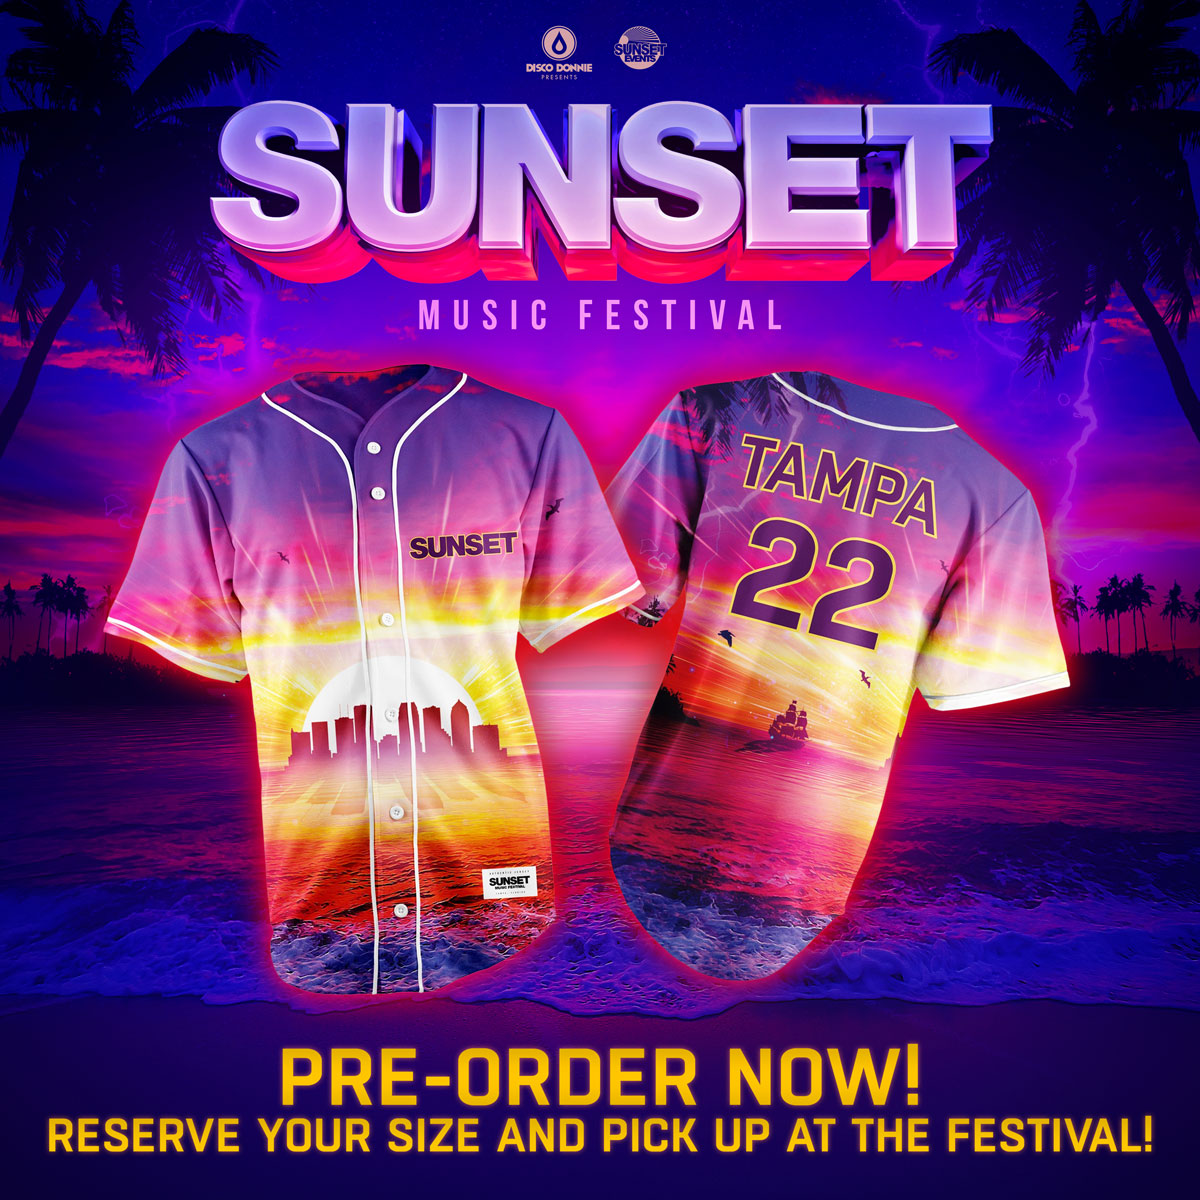 Buy Tickets to Sunset Music Festival EXTRAS in Tampa on May 28, 2022